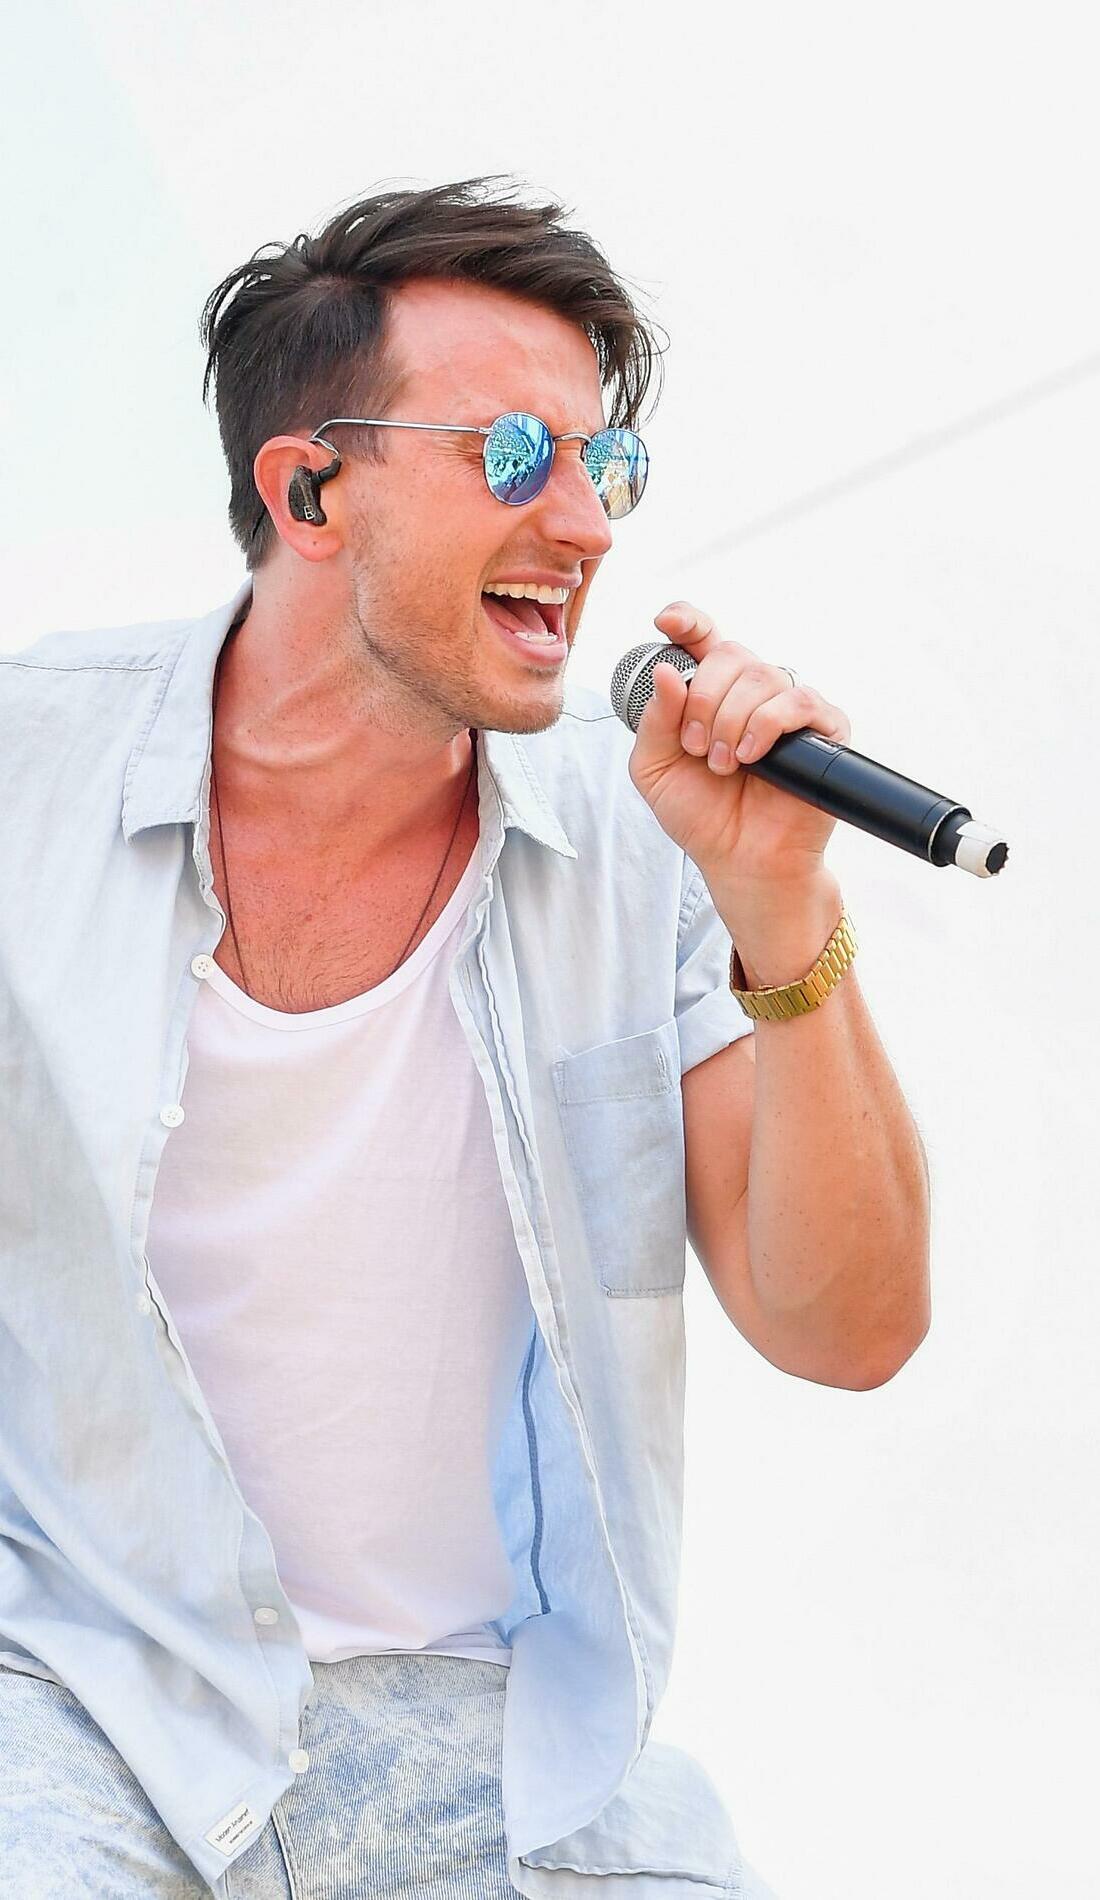 A Russell Dickerson live event